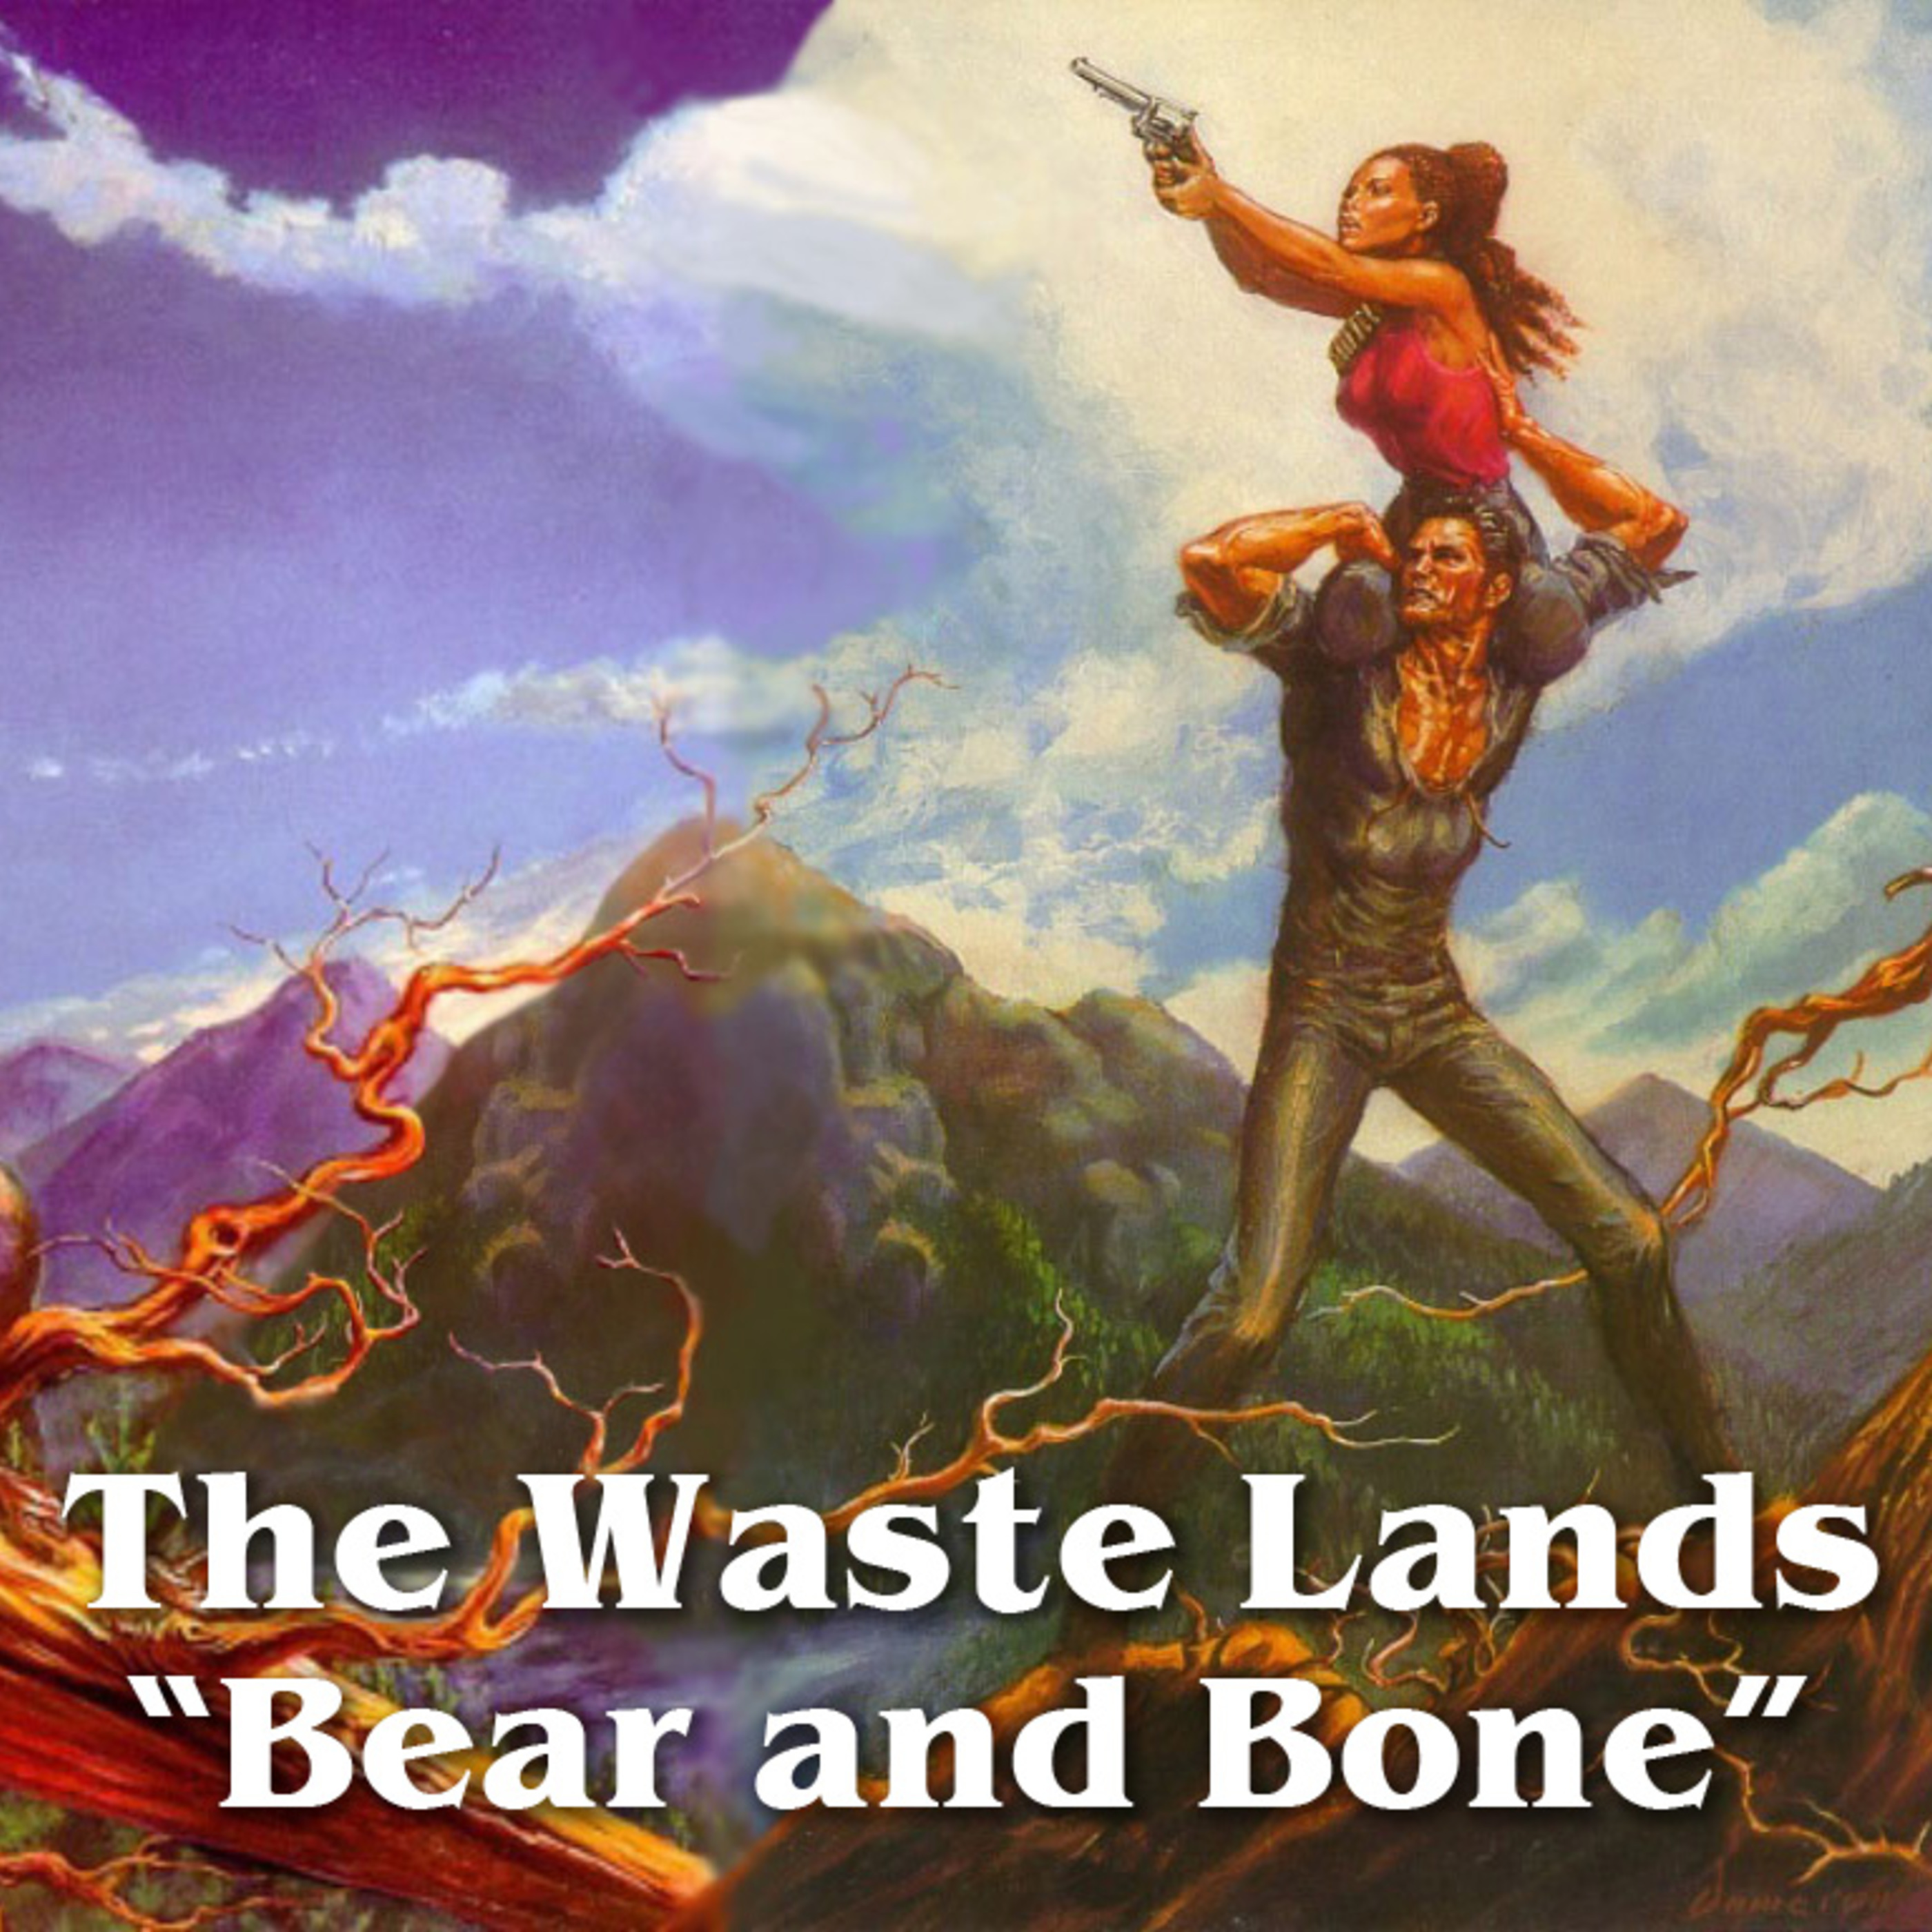 Episode 14: The Waste Lands, ”Bear and Bone”